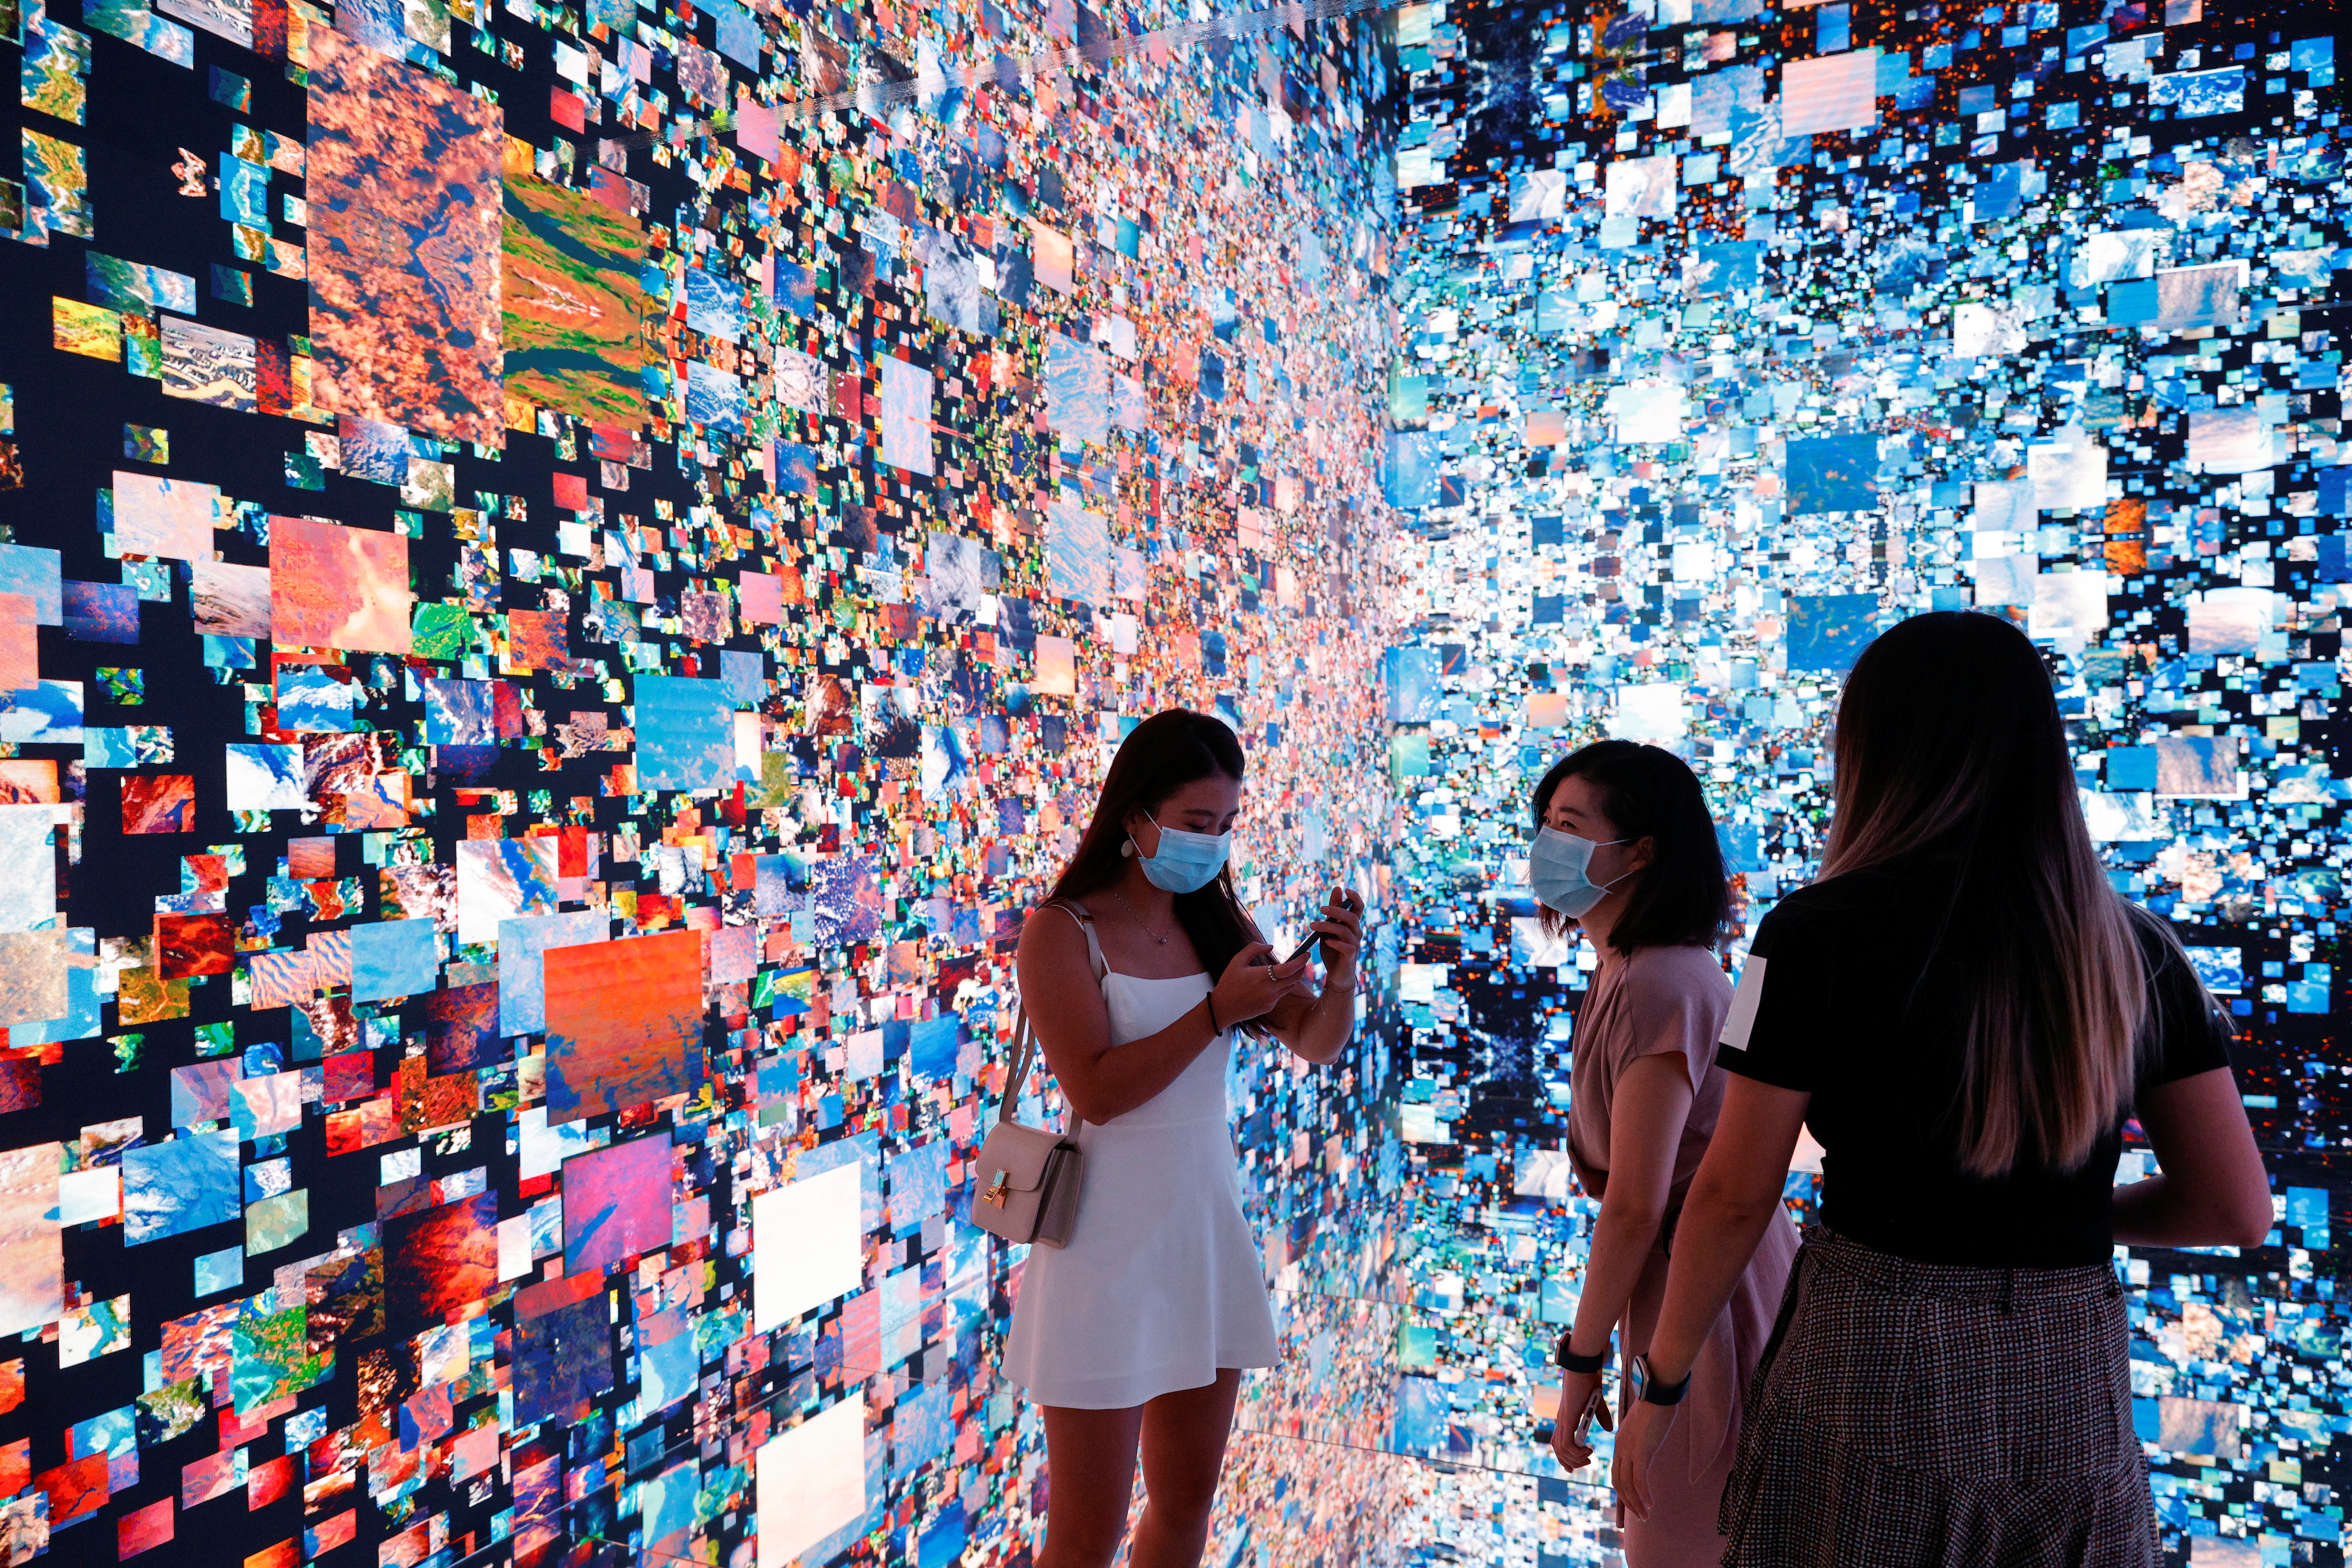 Visitors are pictured in front of an art installation which will be converted into NFT and auctioned online at Sotheby's, in Hong Kong